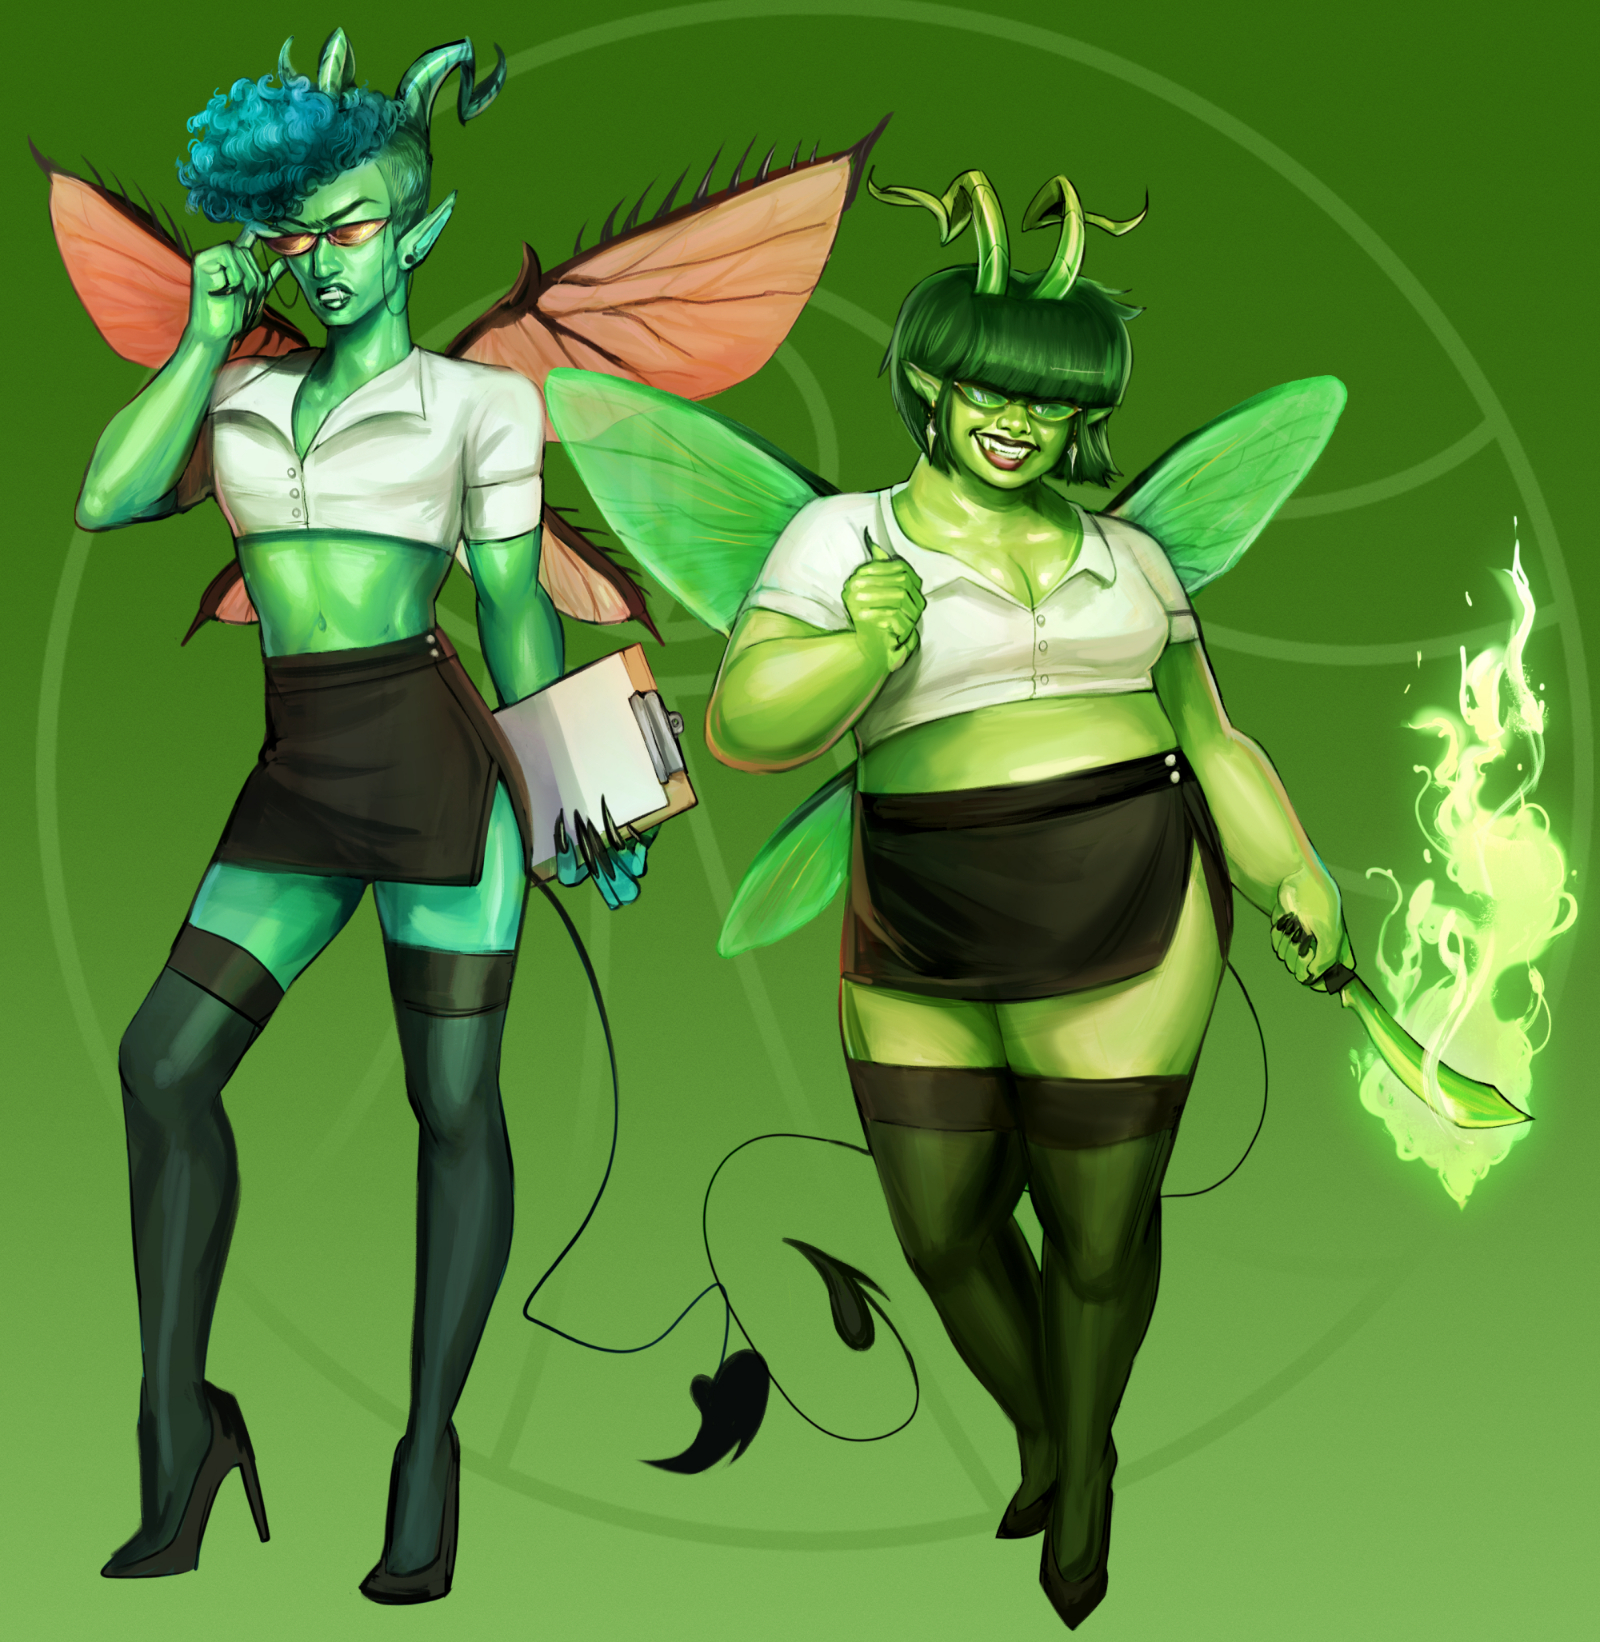 Two figures against a green background, both wearing the same secretary uniform. The one on the left has short curly blue hair and red wings, and is holding a clipboard. The one on the right is fat, has a short bob, green wings, and is holding a knife with green flames emanating from it.